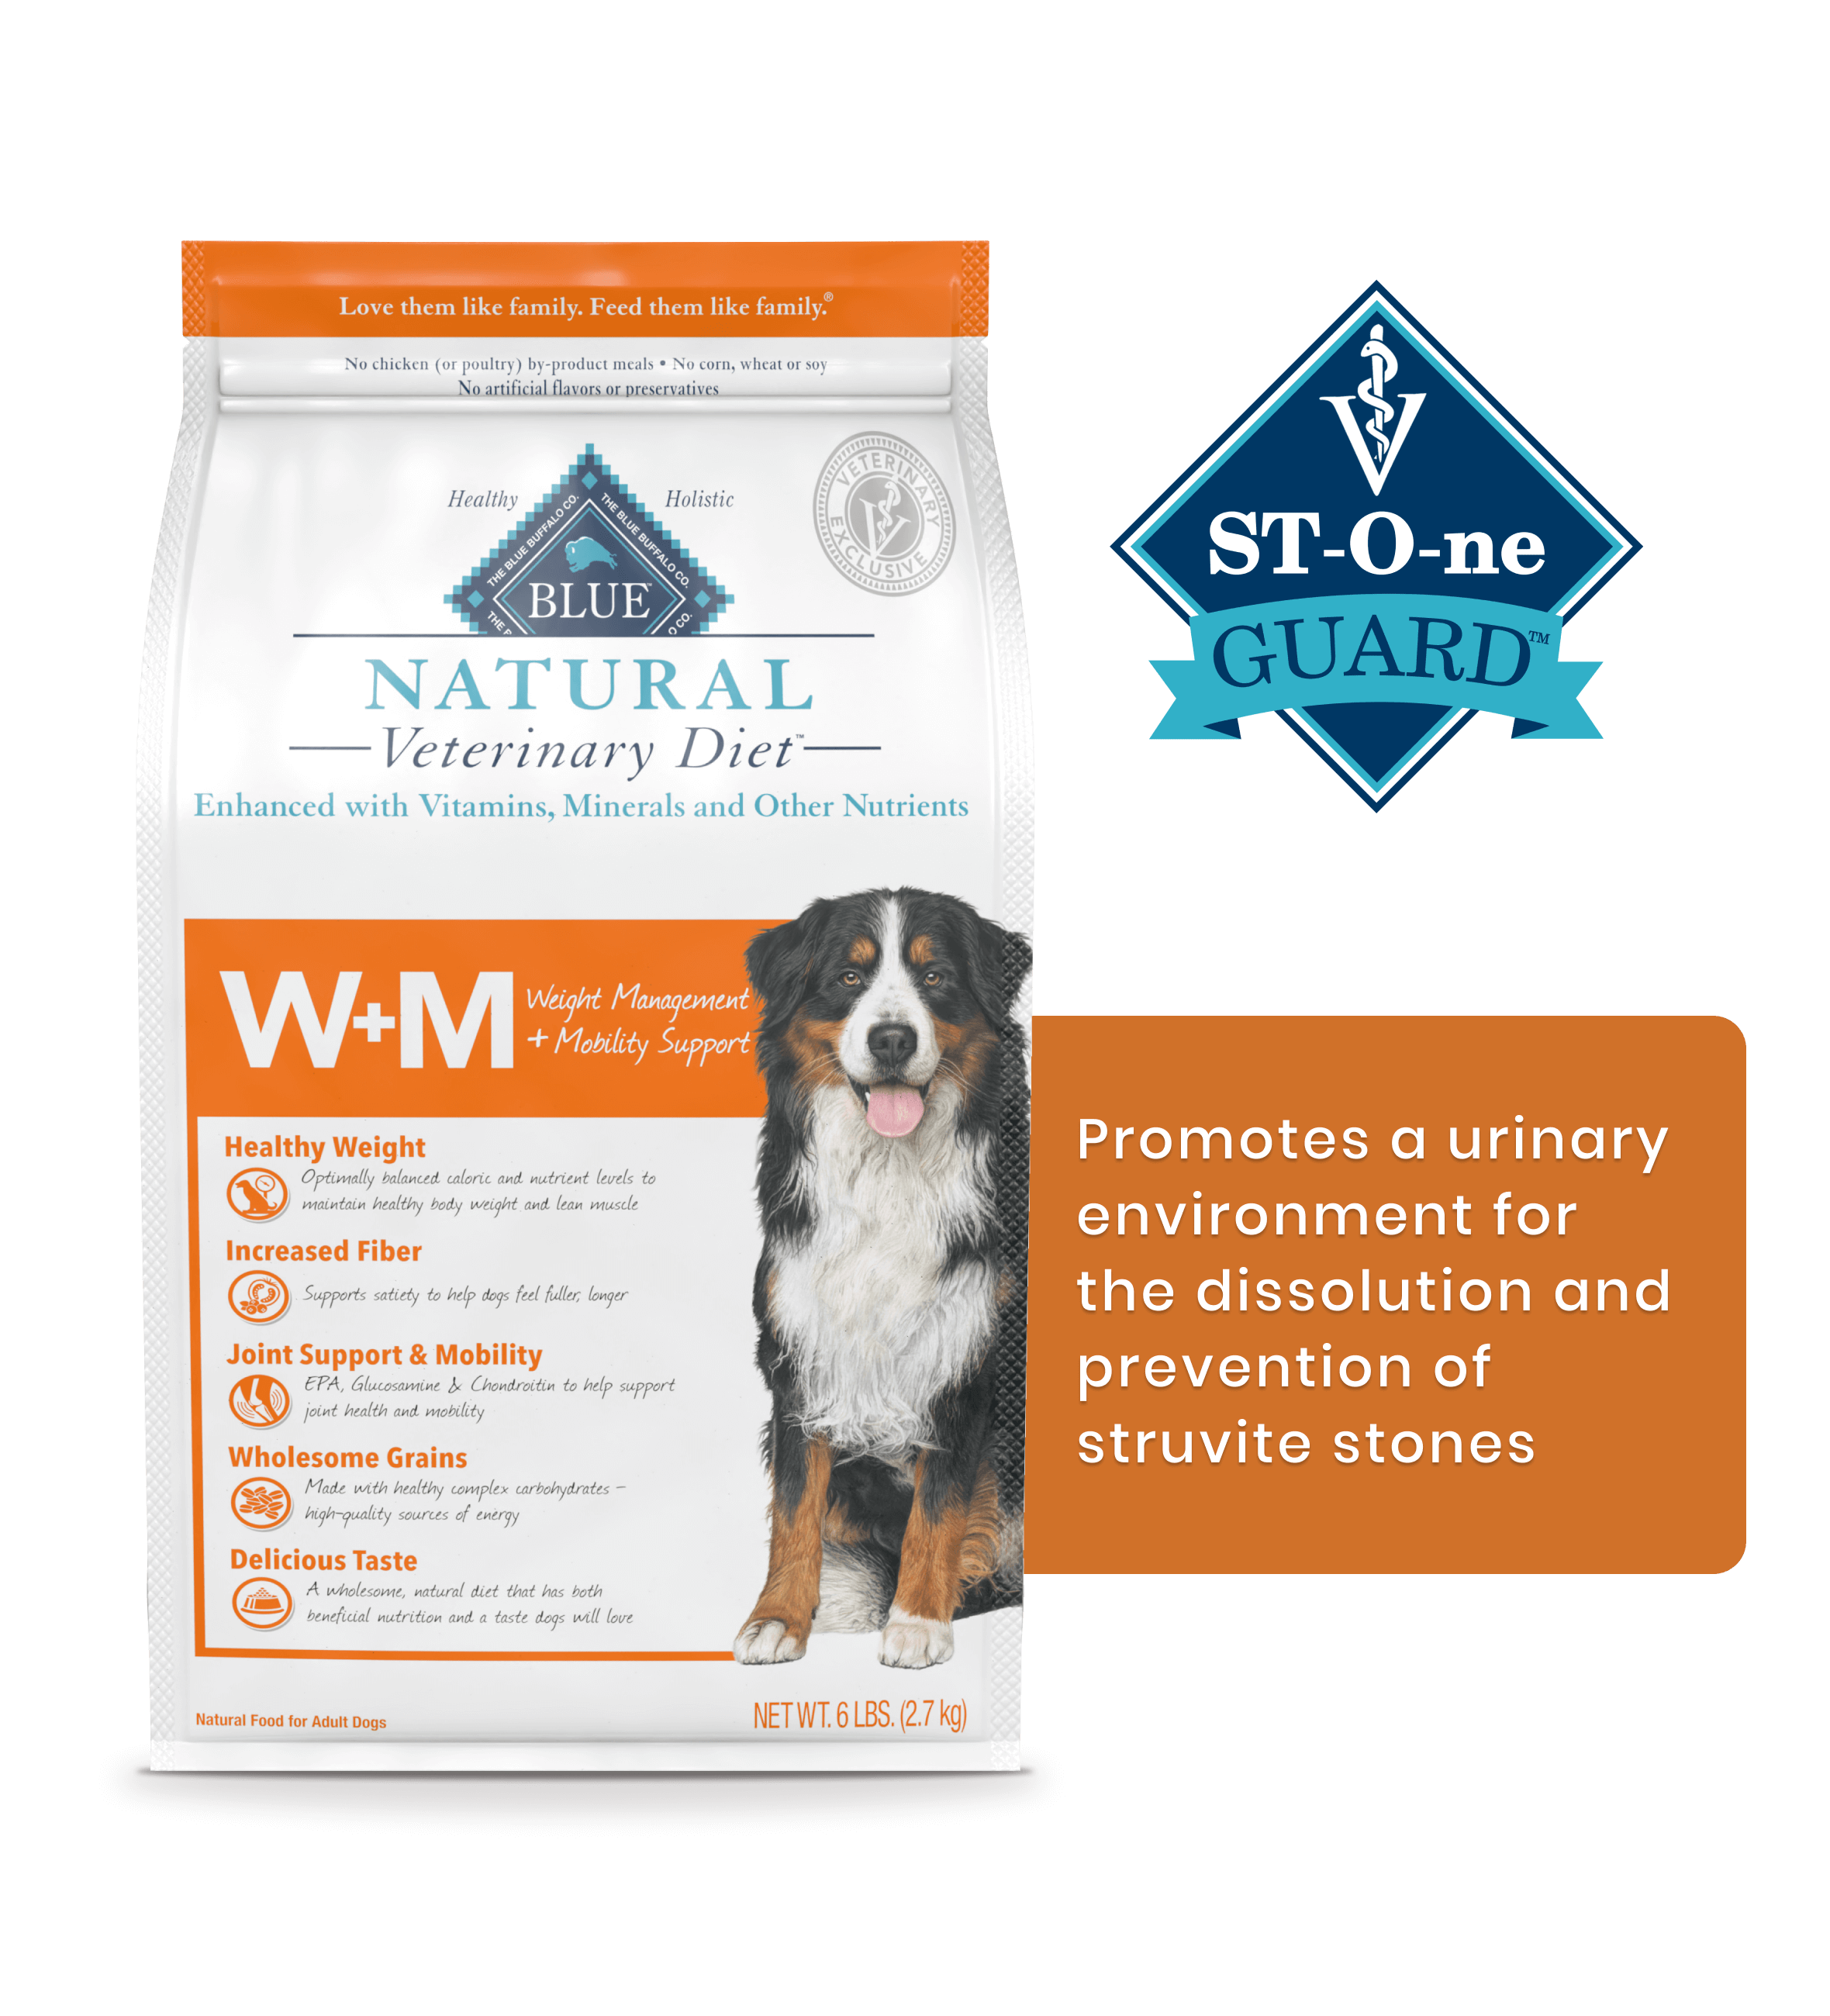 W+M Weight Management + Mobility Support St-O-ne Guard Promotes a urinary environment for the dissolution and prevention of struvite stones